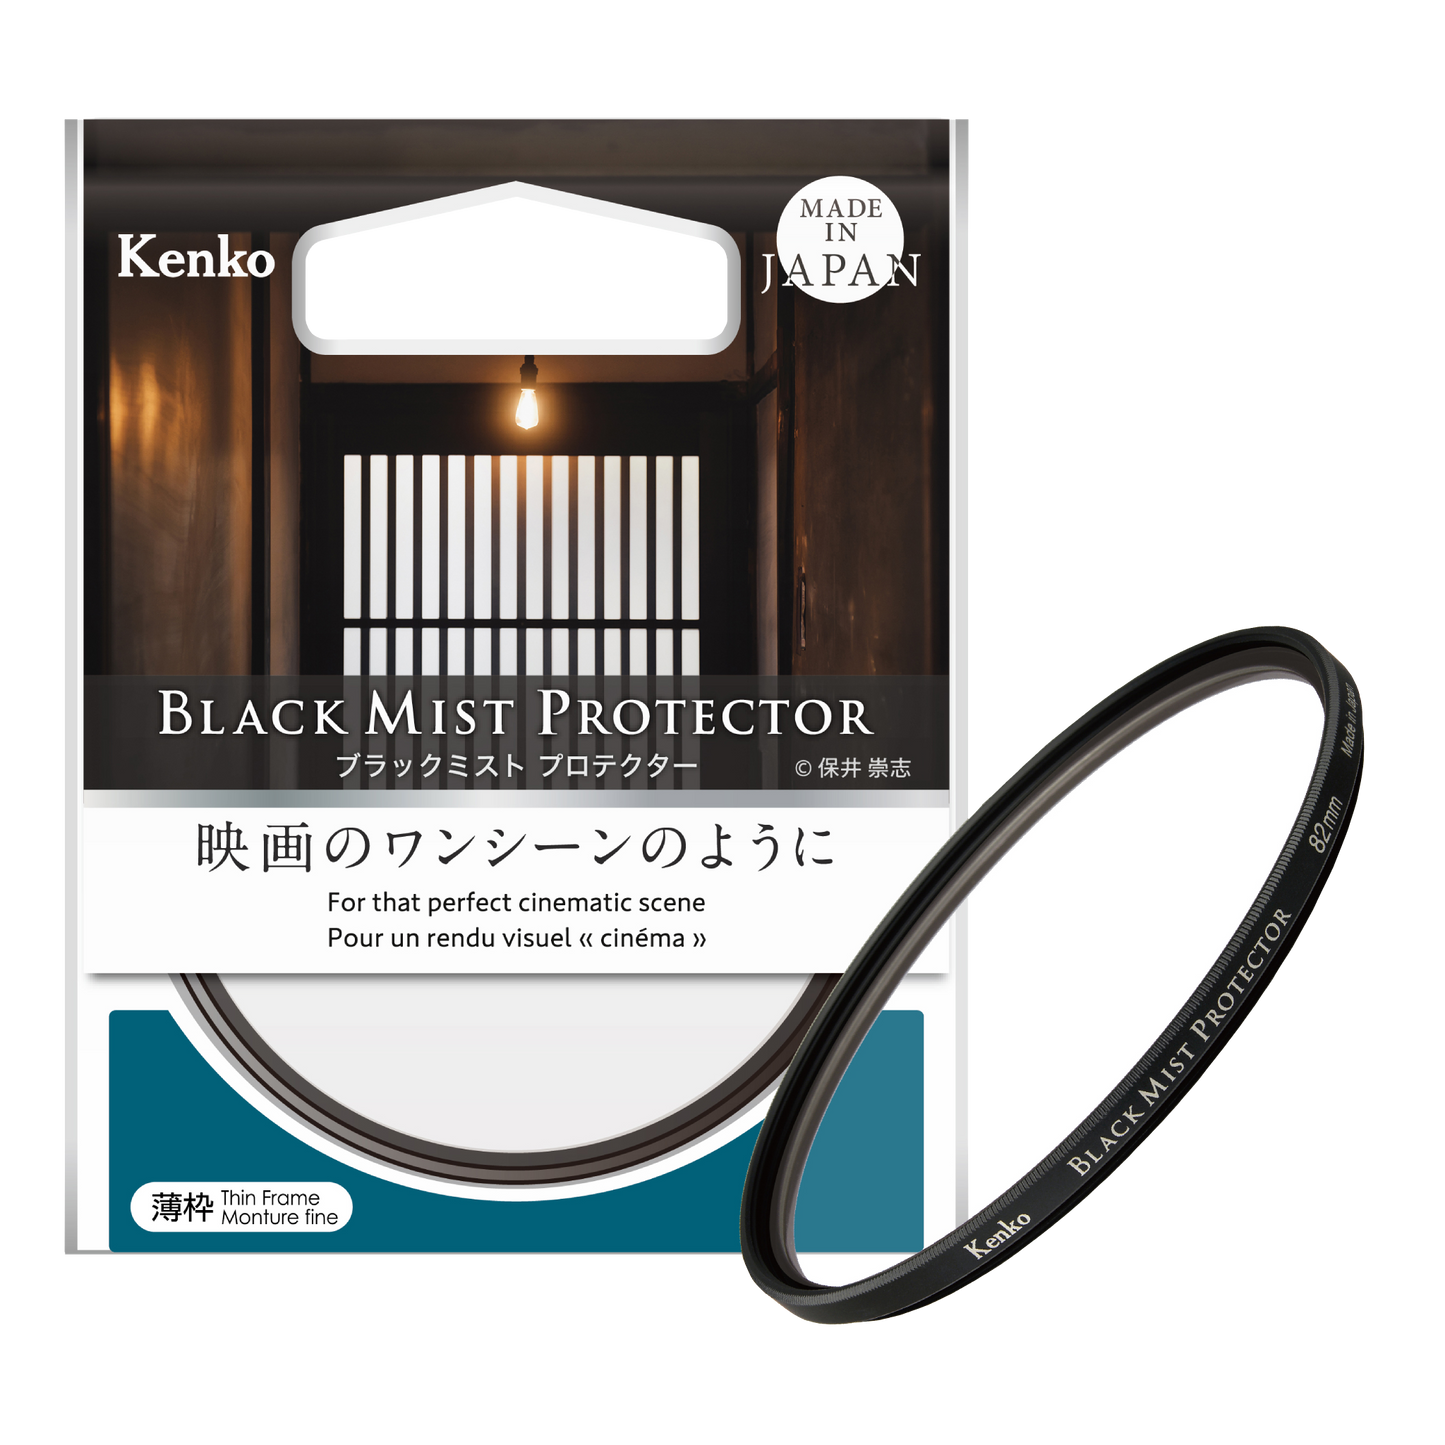 Kenko Black Mist PROTECTOR, Lens Protection & Diffusion Effect Filter